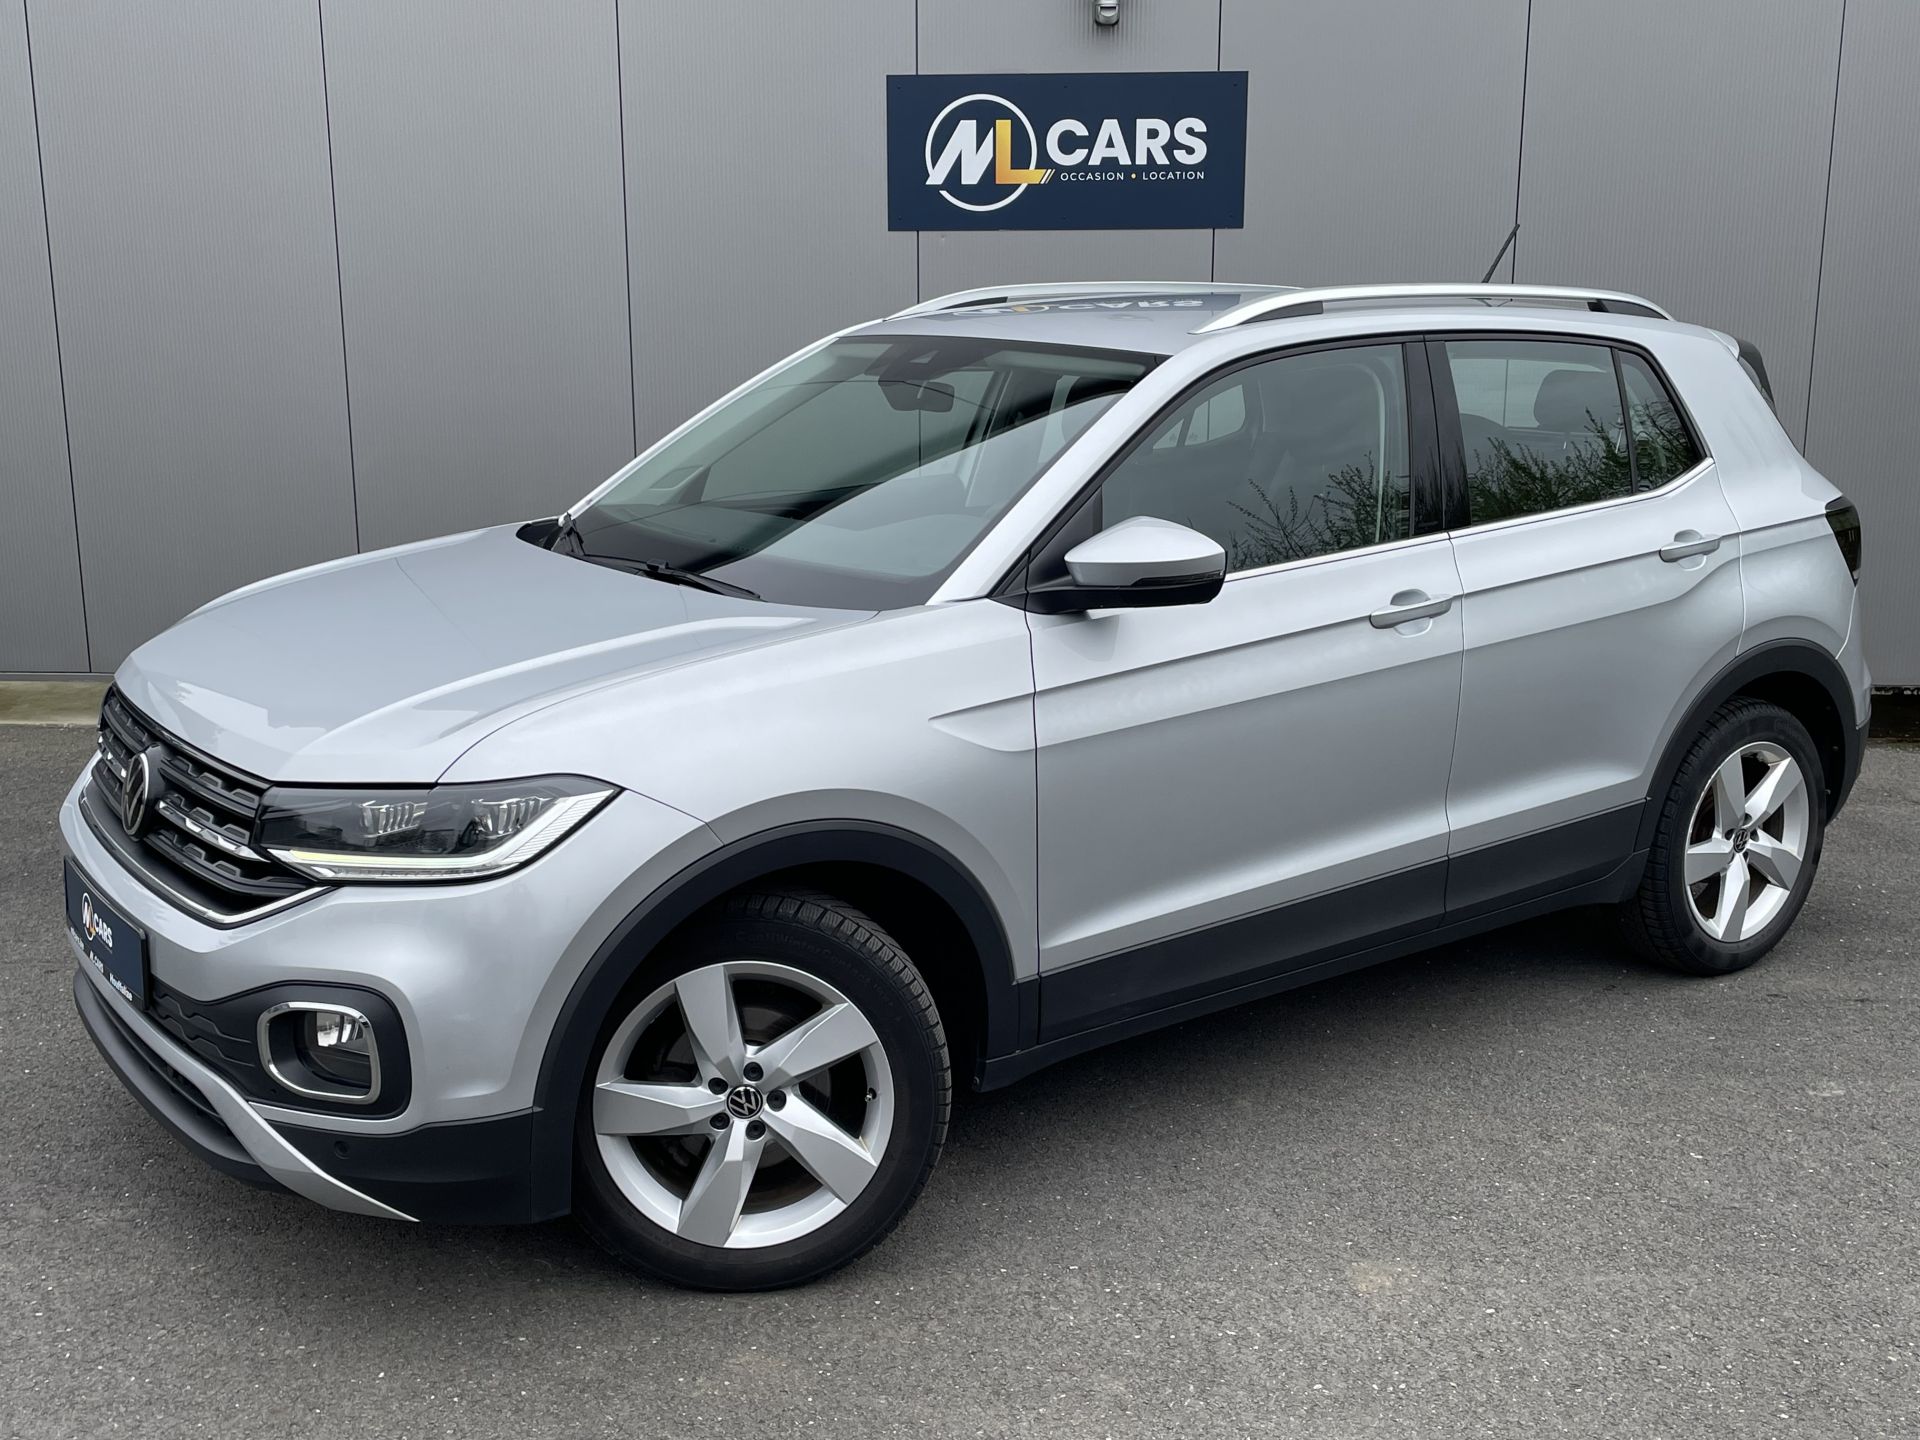 occasion VOLKSWAGEN T-Cross occasion 1.0 TSI STYLE AUTOMATIQUE 2021 5 portes - ML Cars à Houffalize